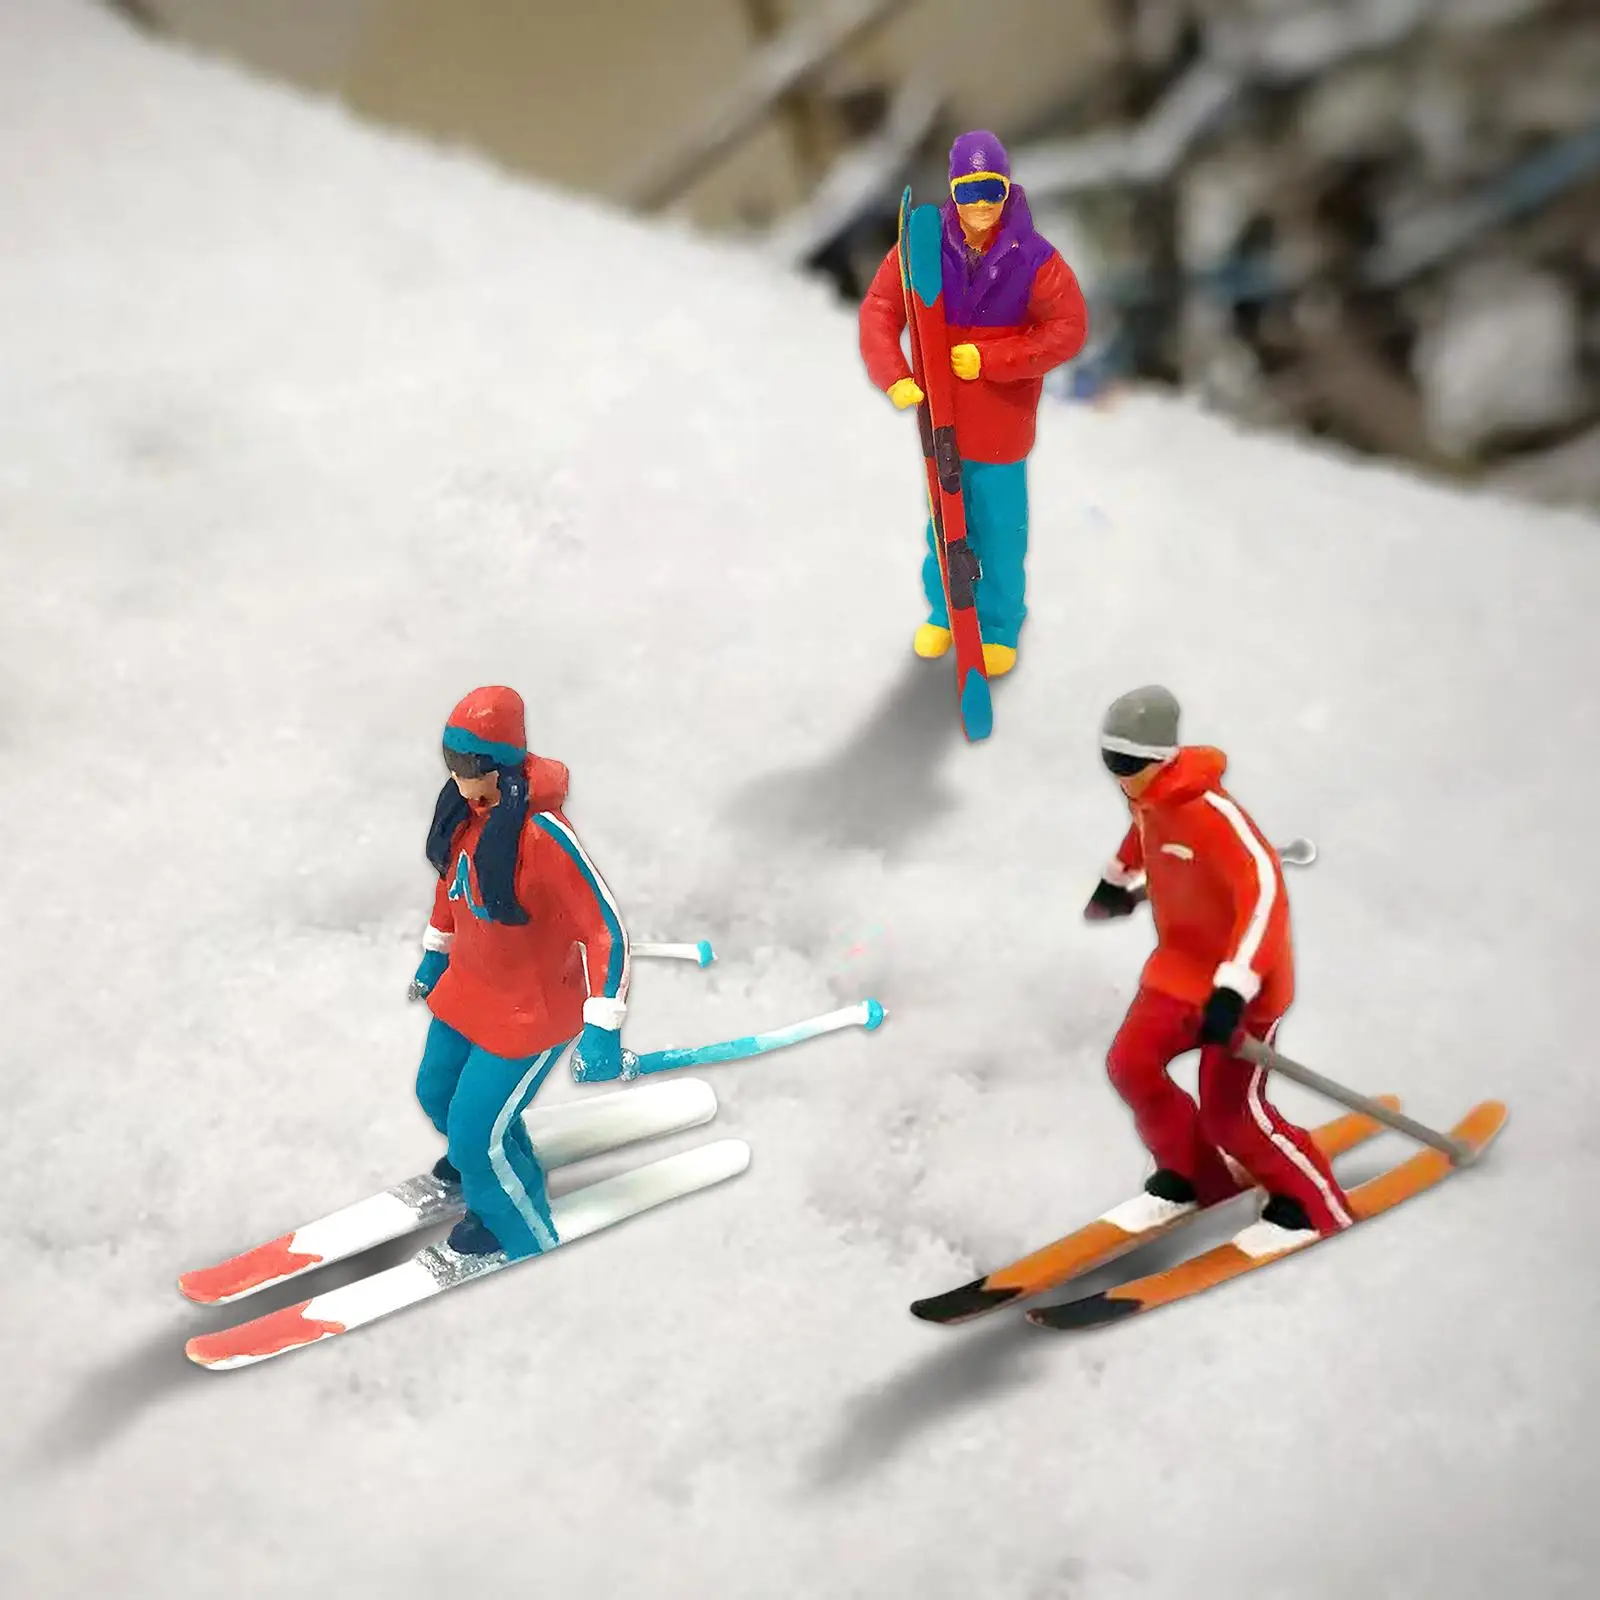 3x HO Scale Miniature Model Skiing Figures Sand Table Scene for 